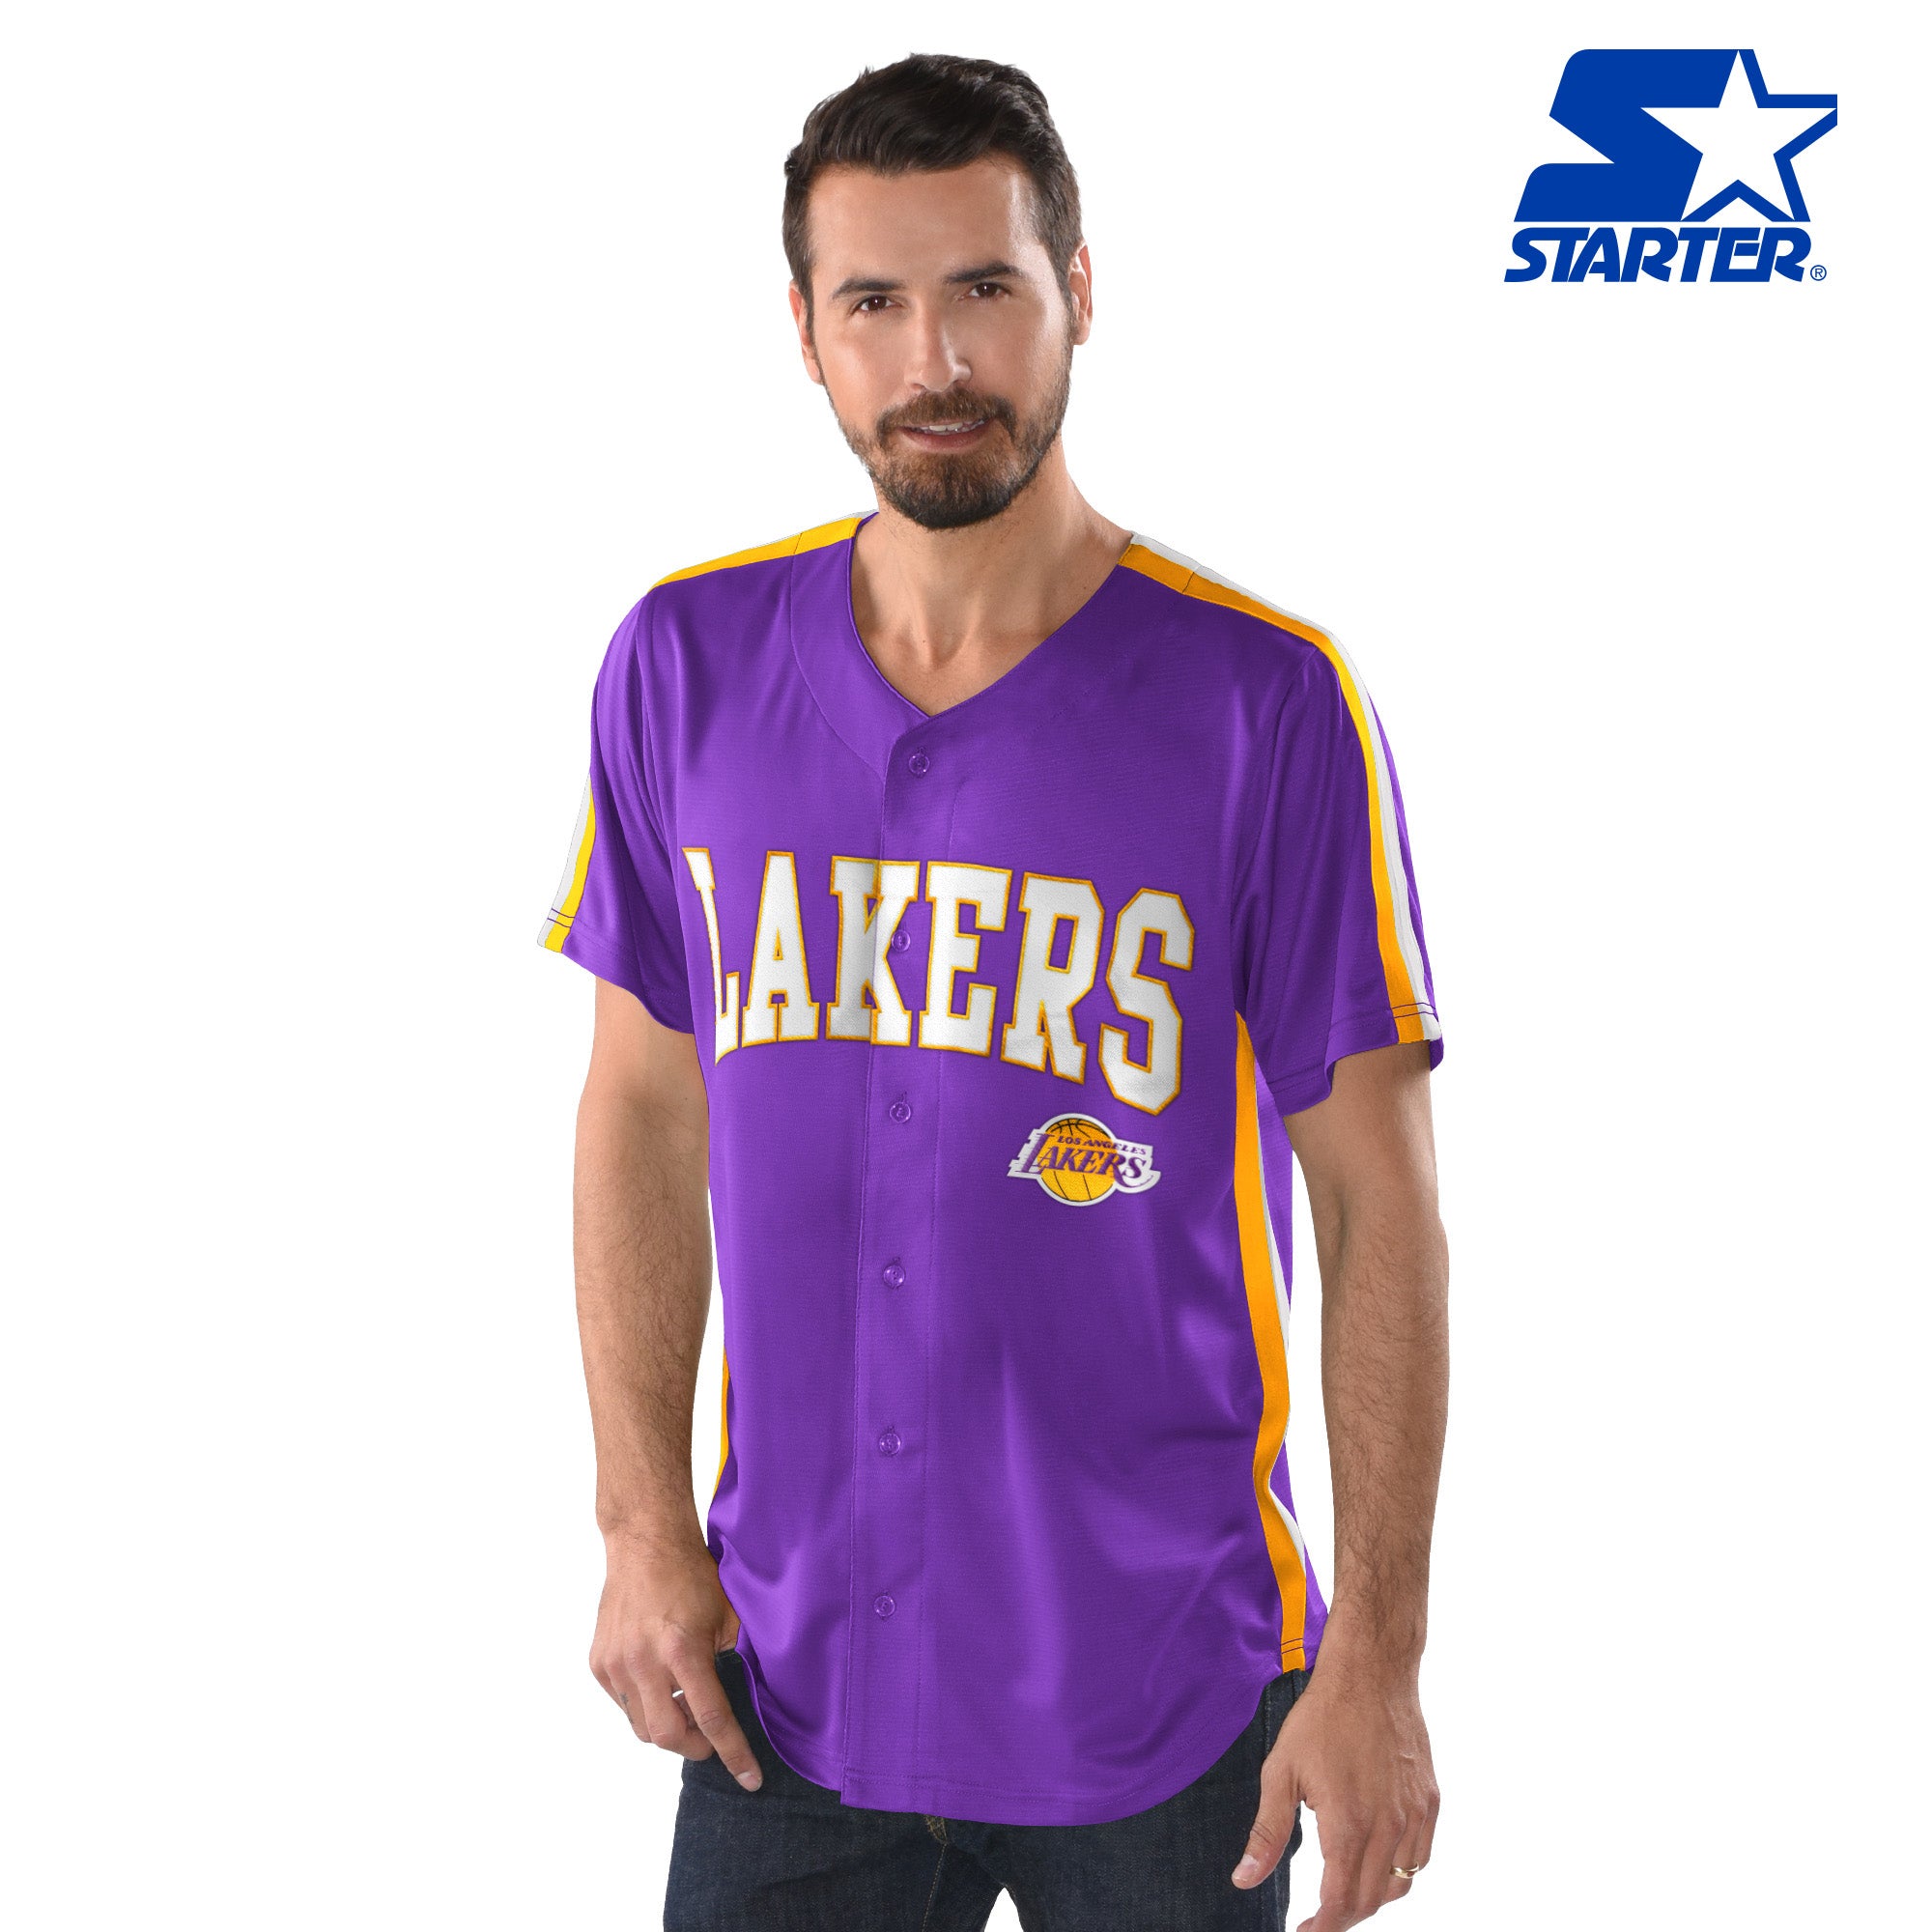 lakers starter jersey